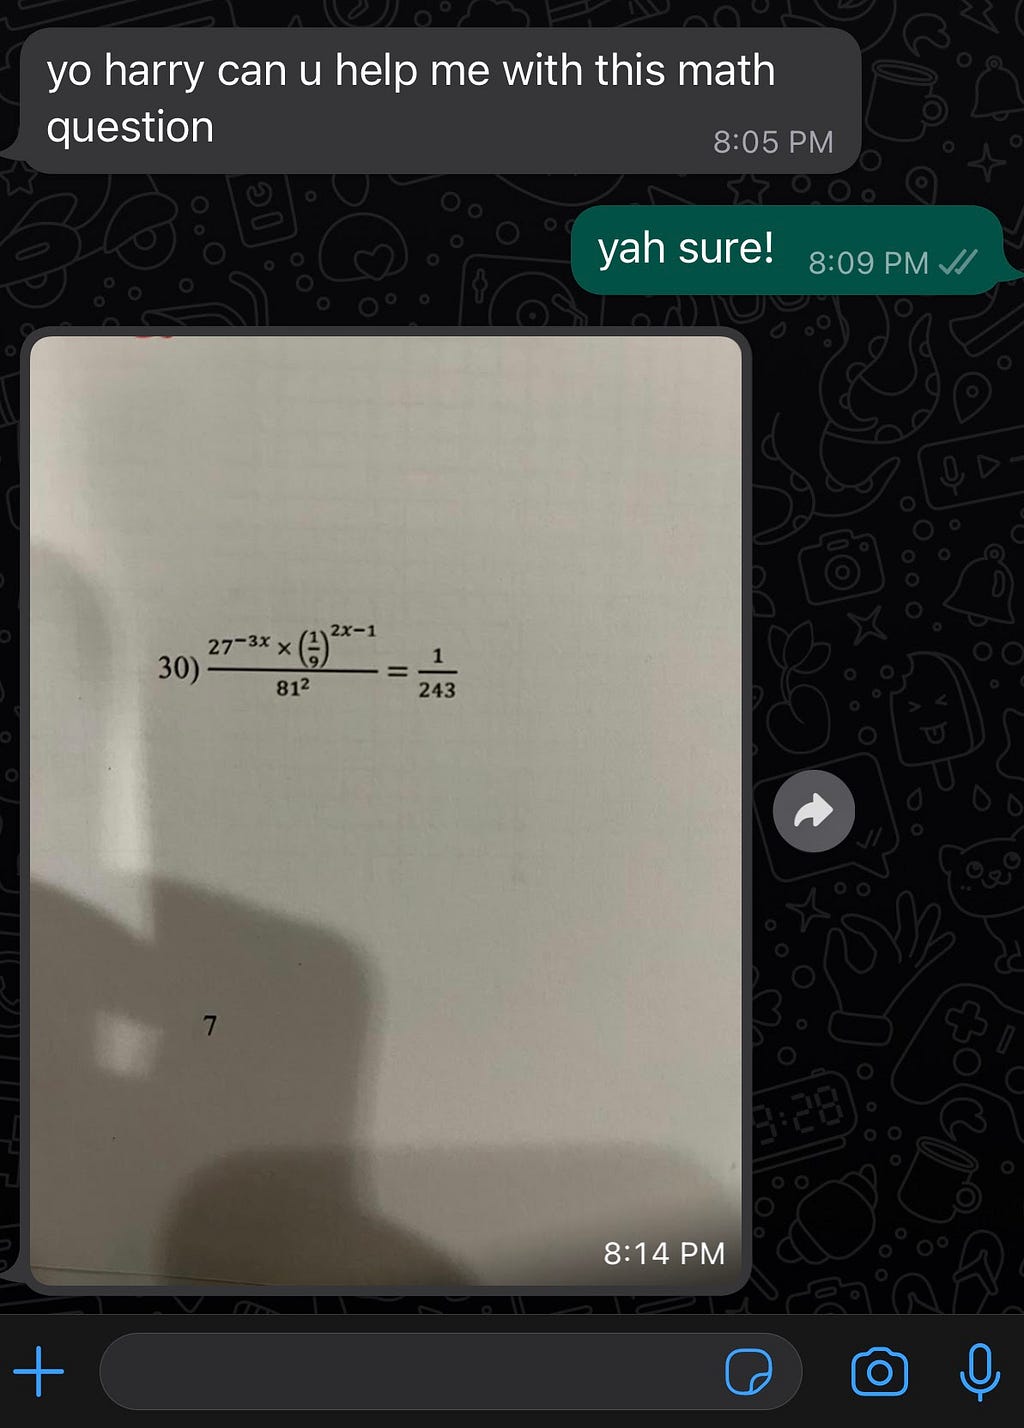 My friend asking me to help him with this math question